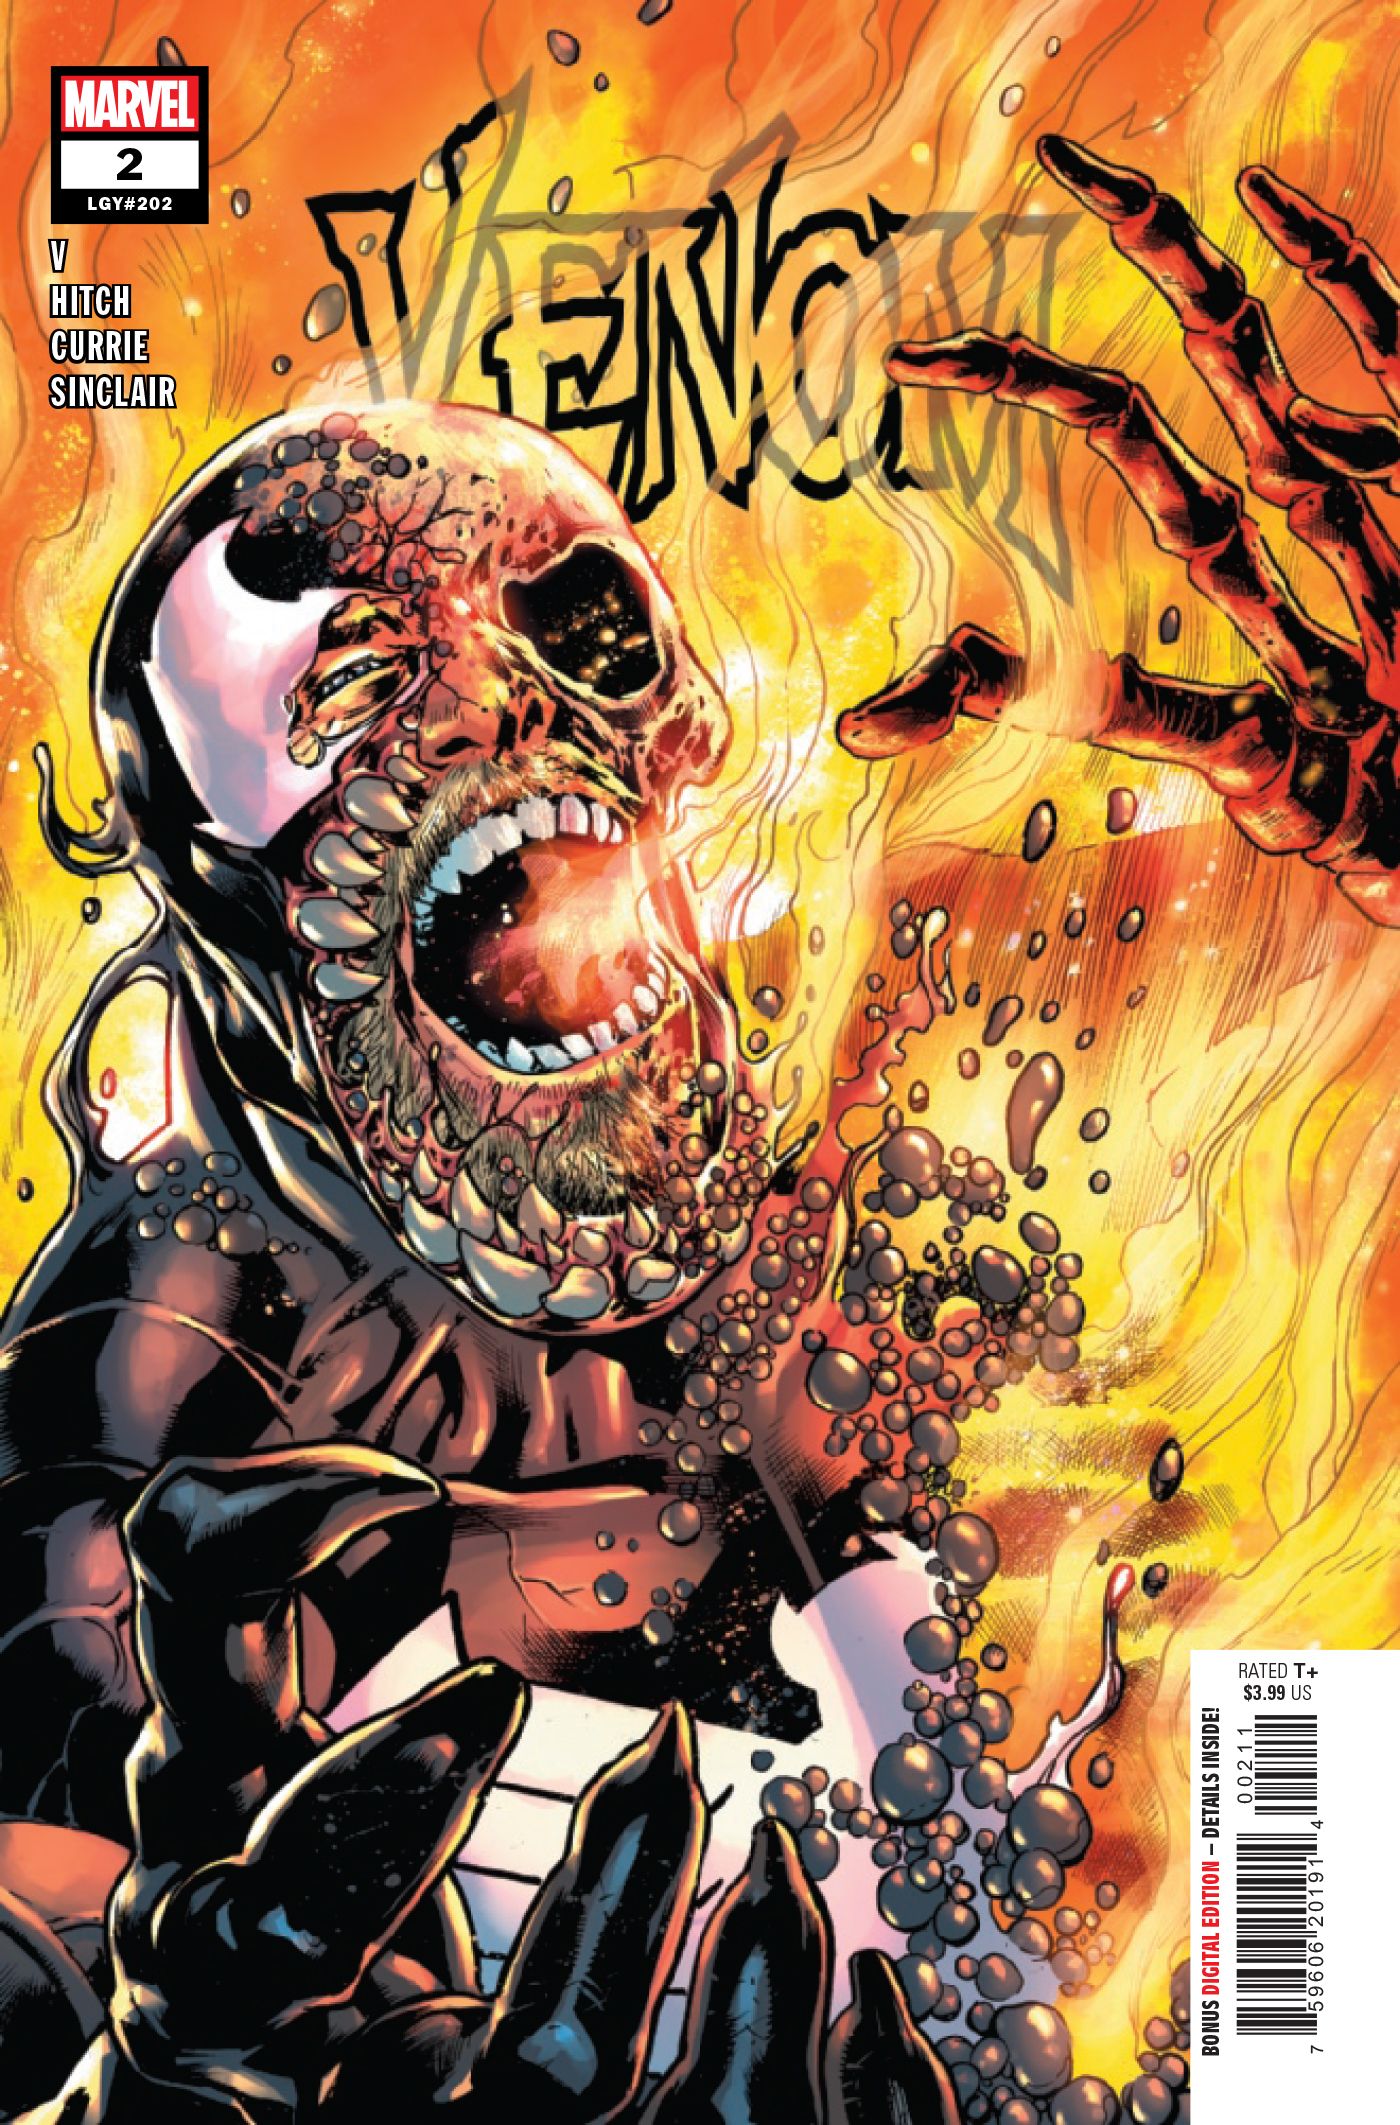 The cover to Venom #2 shows Eddie Brock and the symbiote burning in fire.